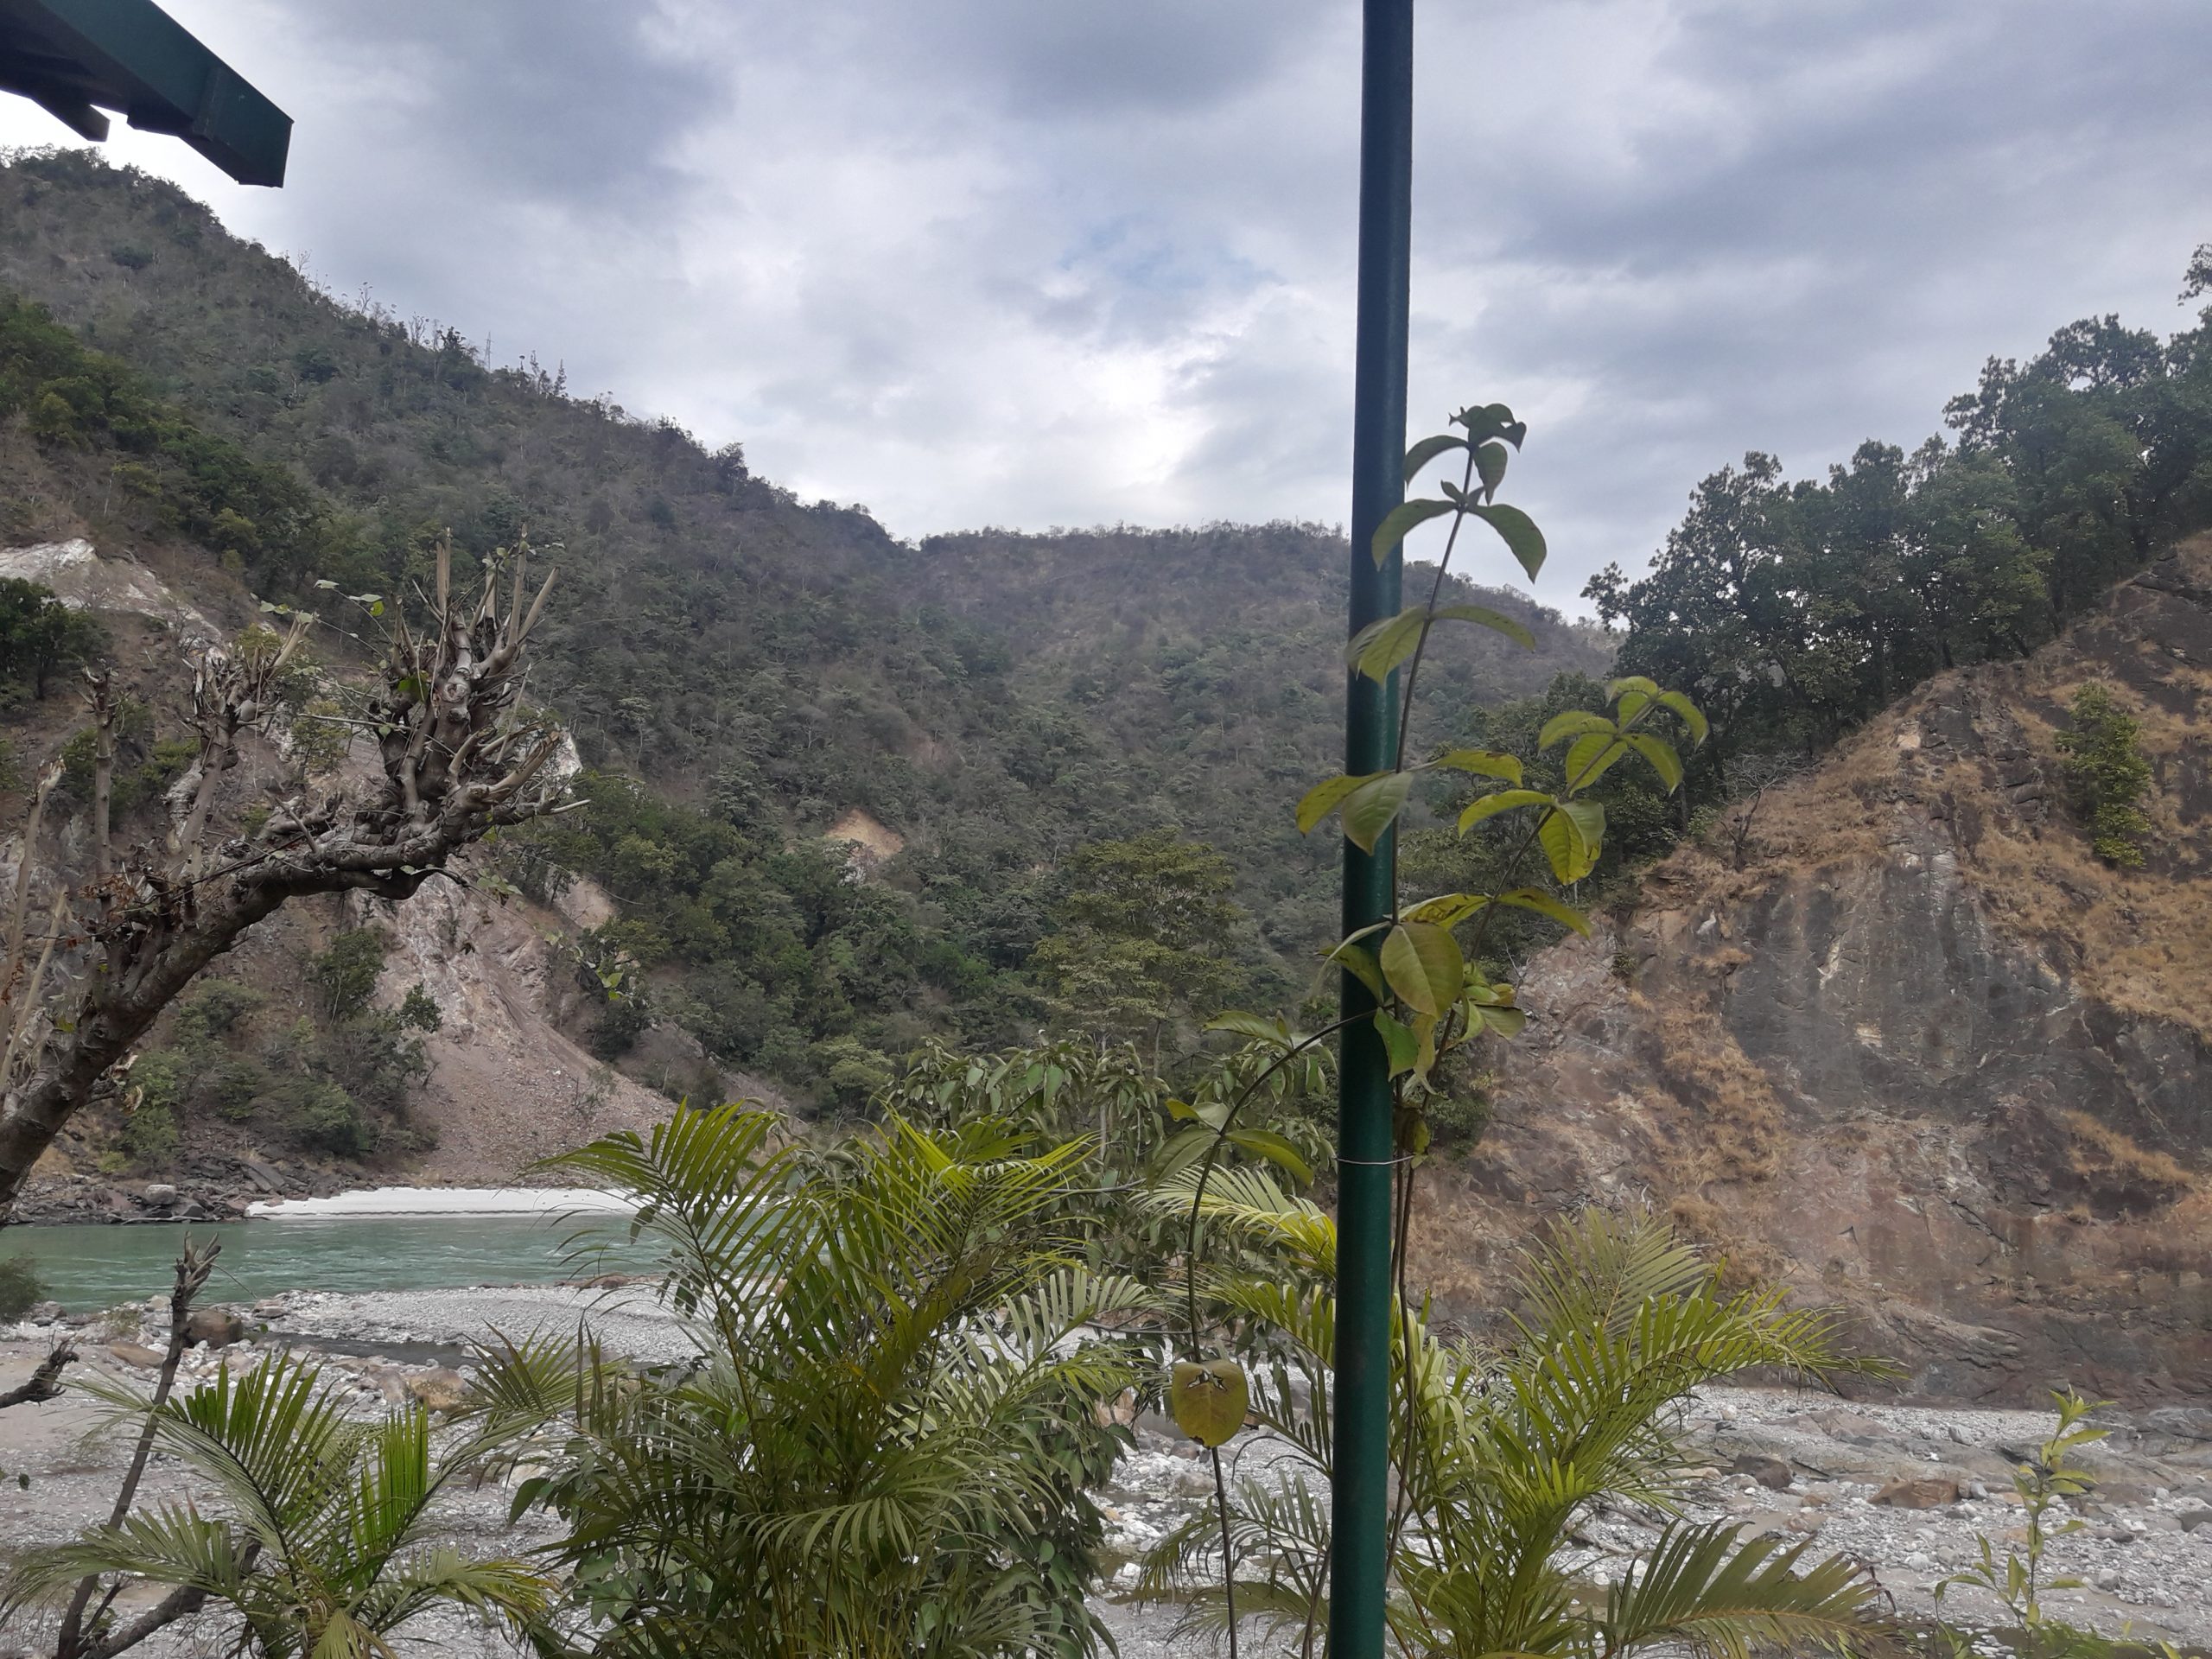 A river flowing through mountains in Rishikesh